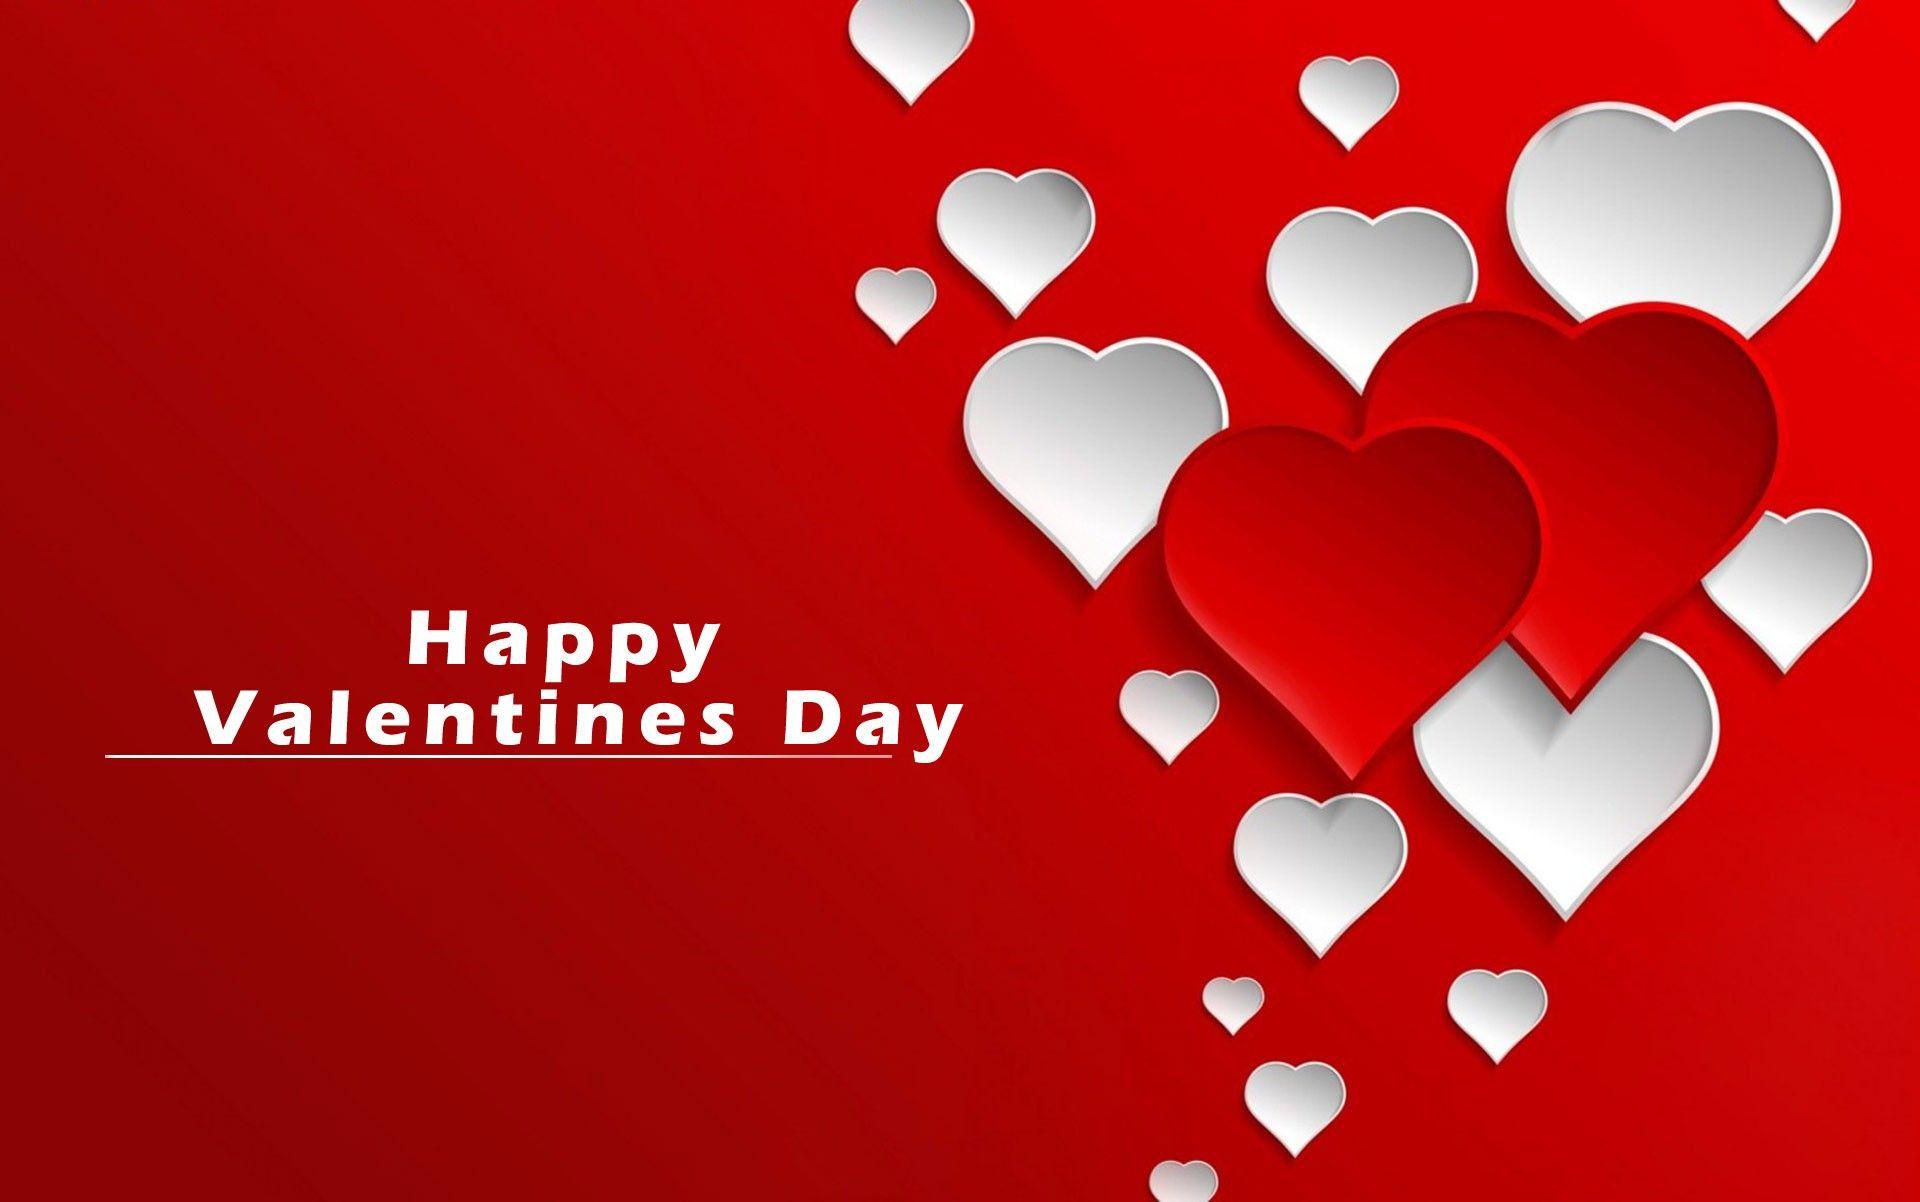 Happy Valentine's Day 2018 Image HD, 3D Wallpaper, Greetings